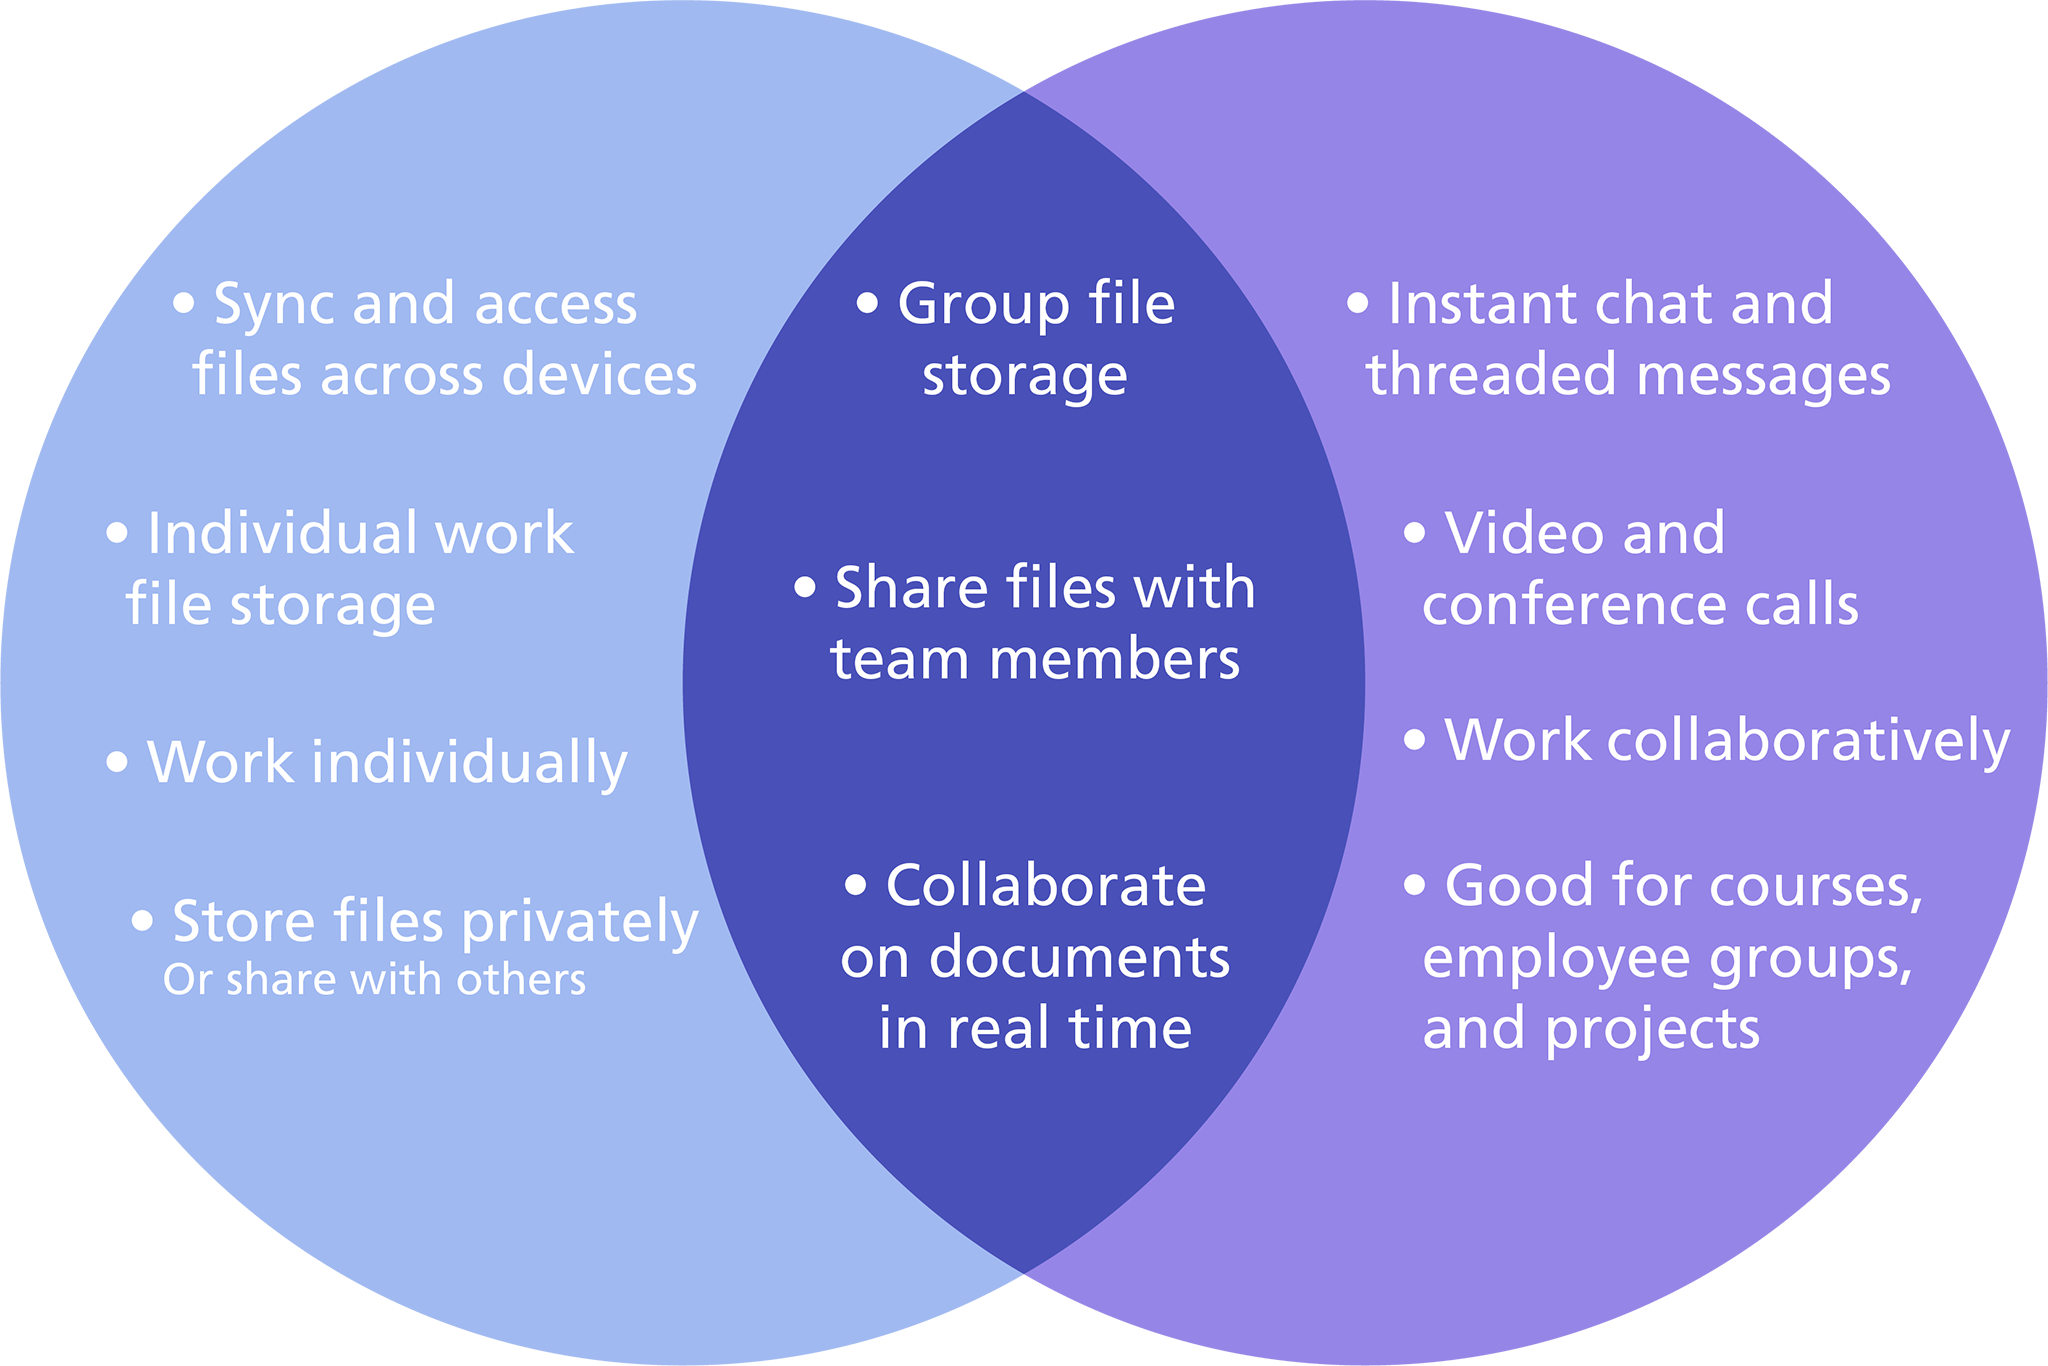 When To Use Onedrive Vs Sharepoint Vs Teams?